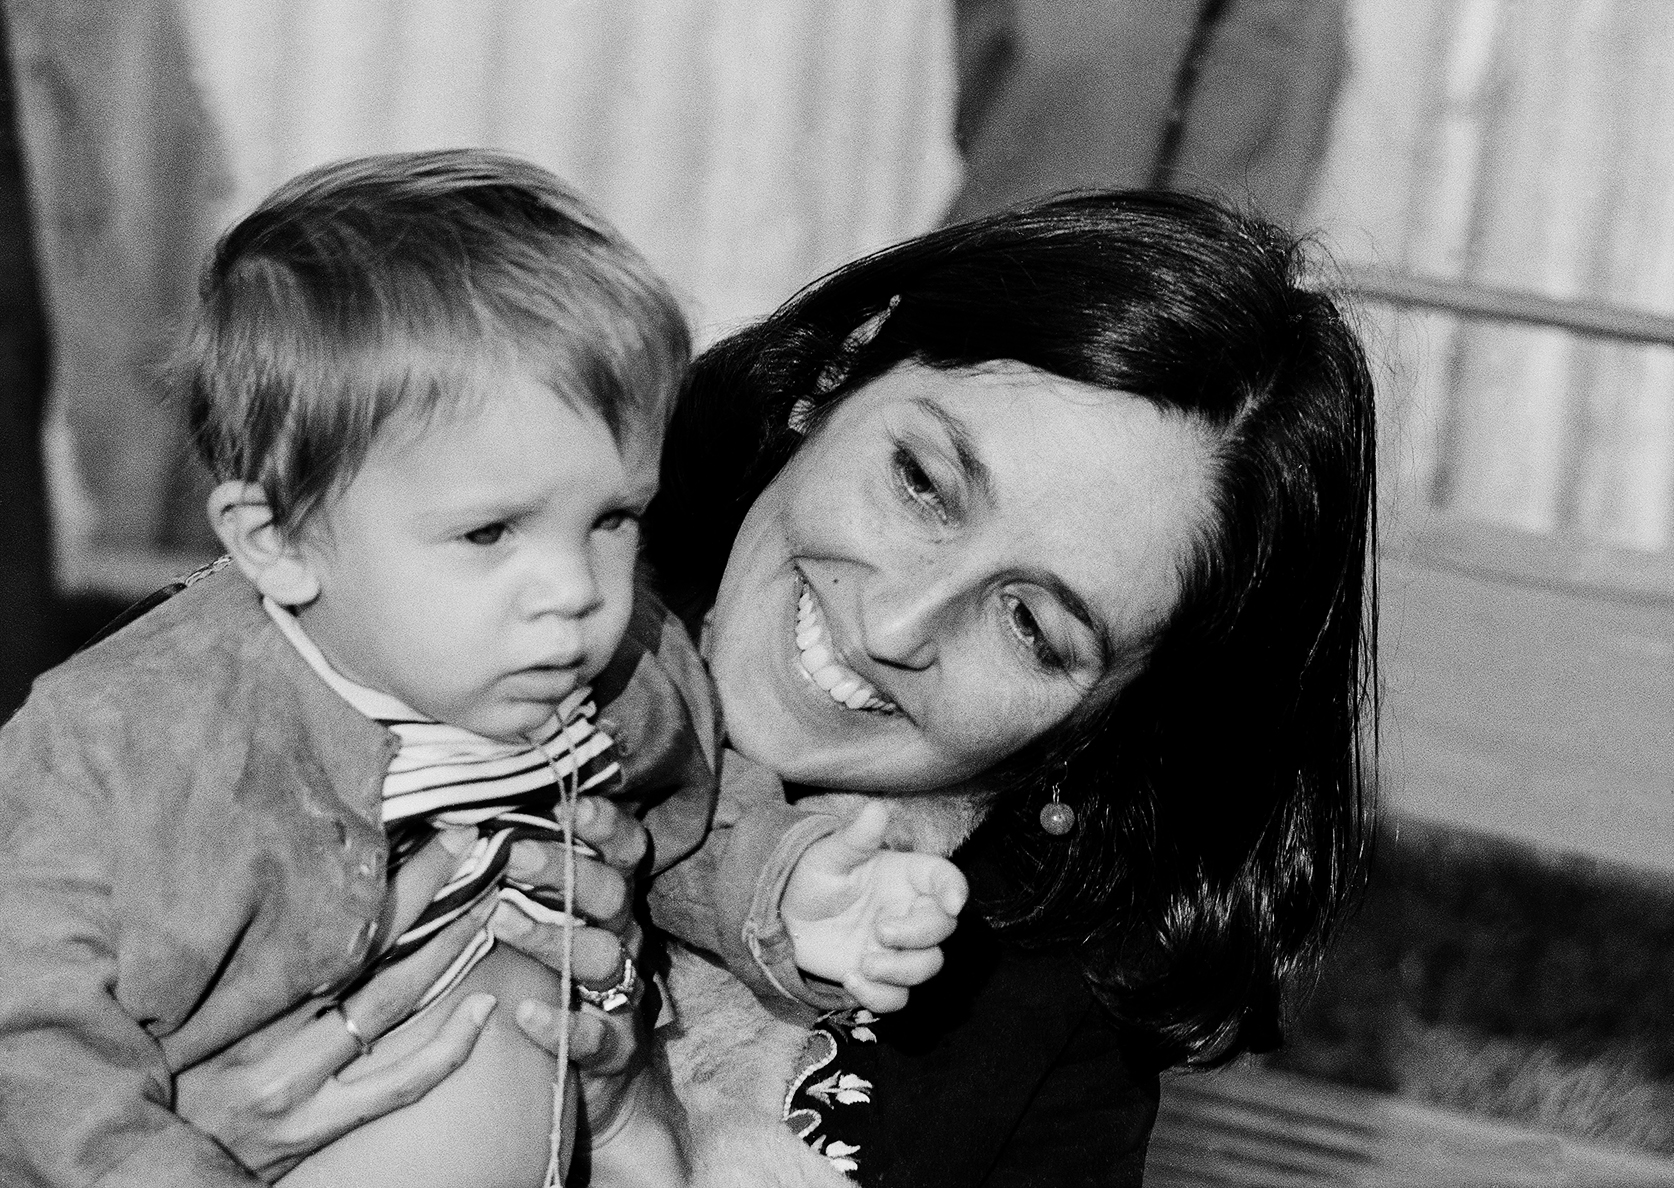 Joan Baez and Son
IOW'1970 : Personal Projects : MICHEL ARNAUD PHOTOGRAPHY